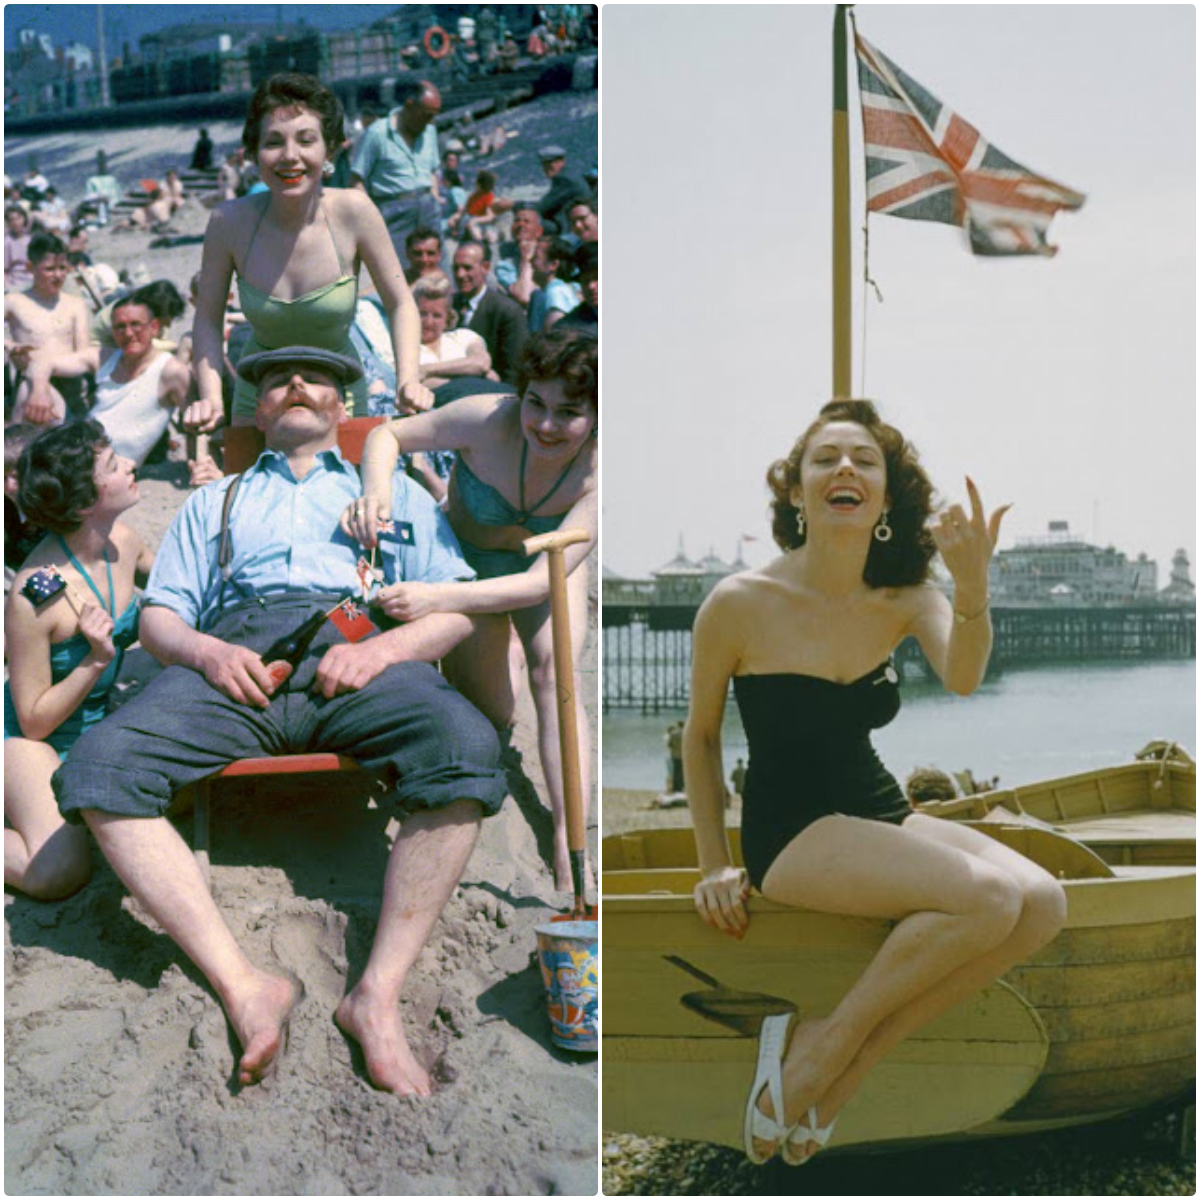 Wonderful Color Photographs Show the Heyday of Blackpool Beach in the 1950s